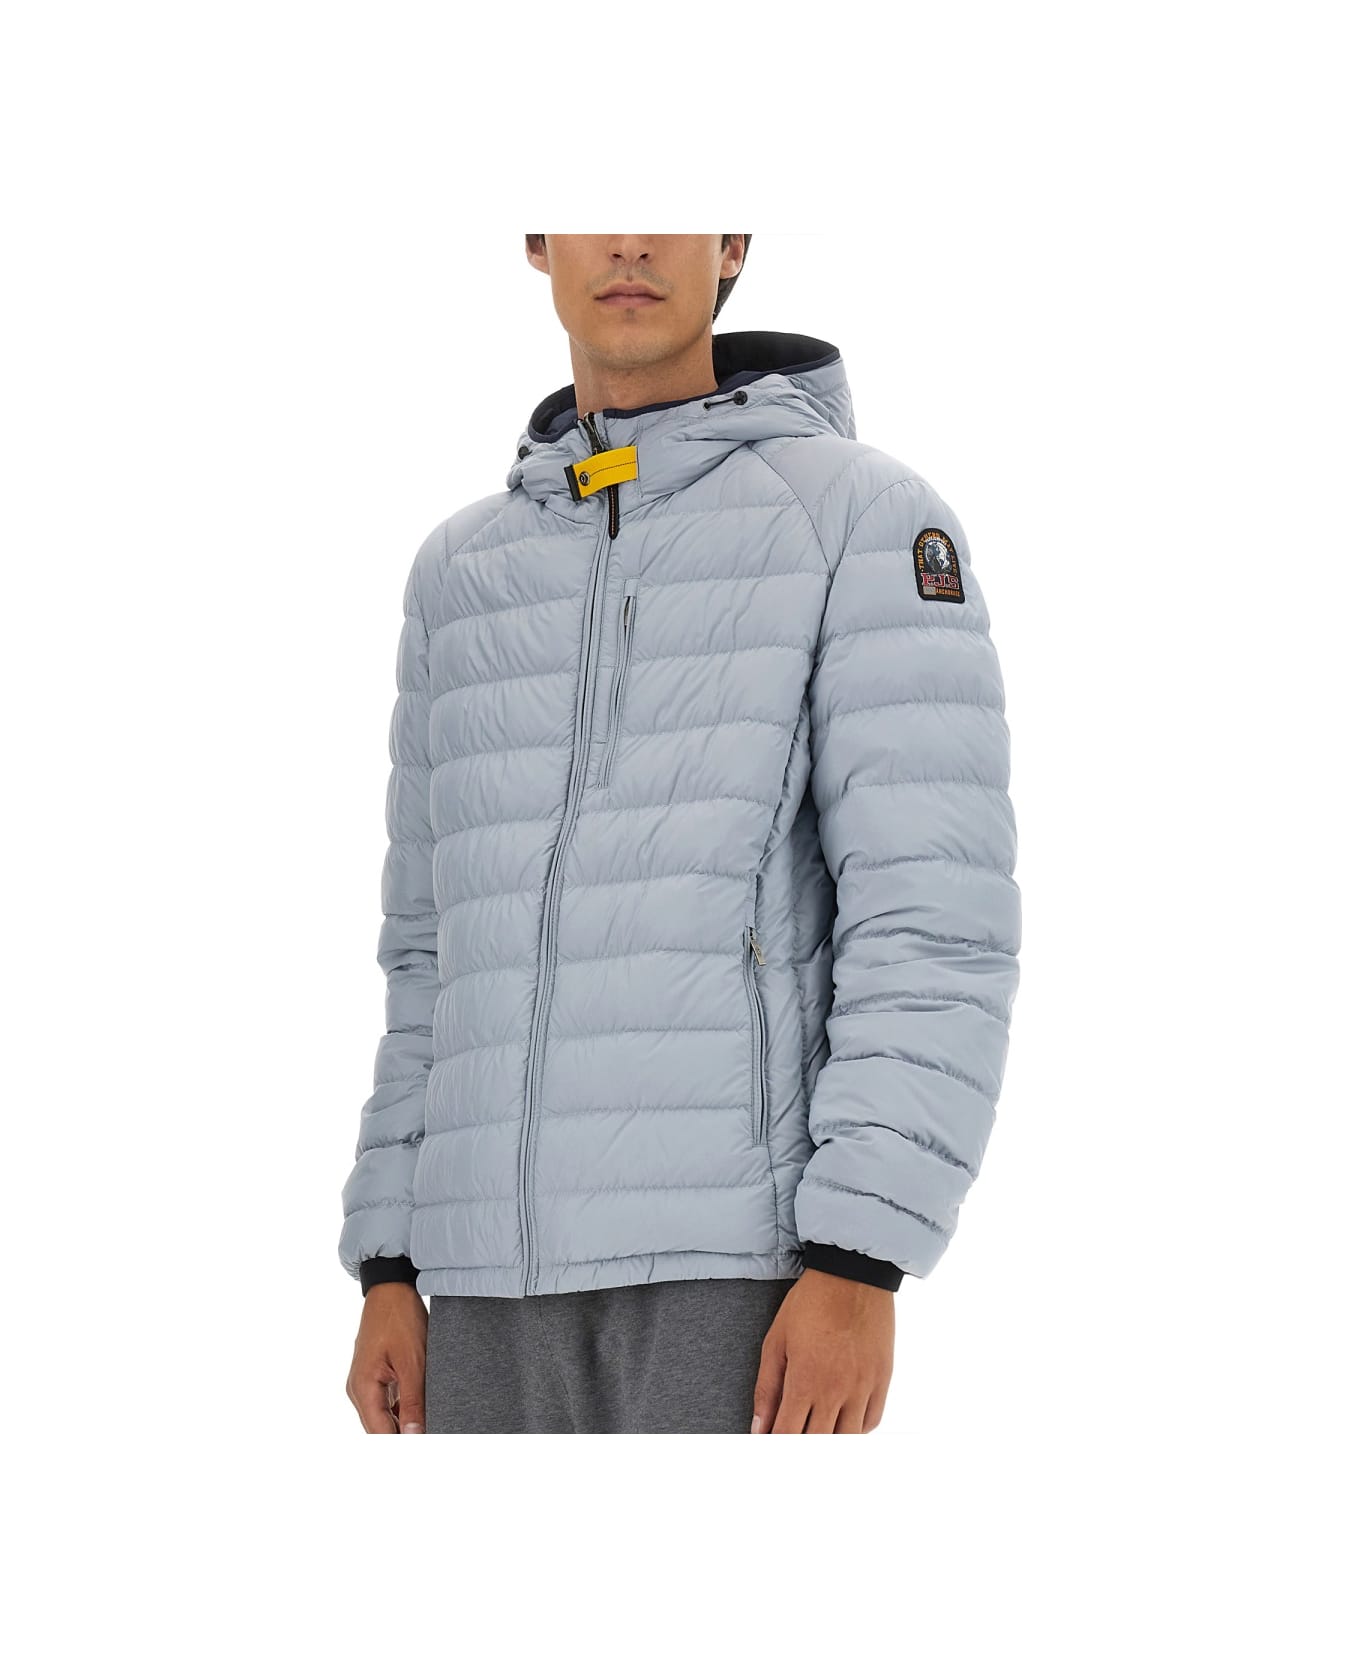 Parajumpers Reversible Jacket - BABY BLUE